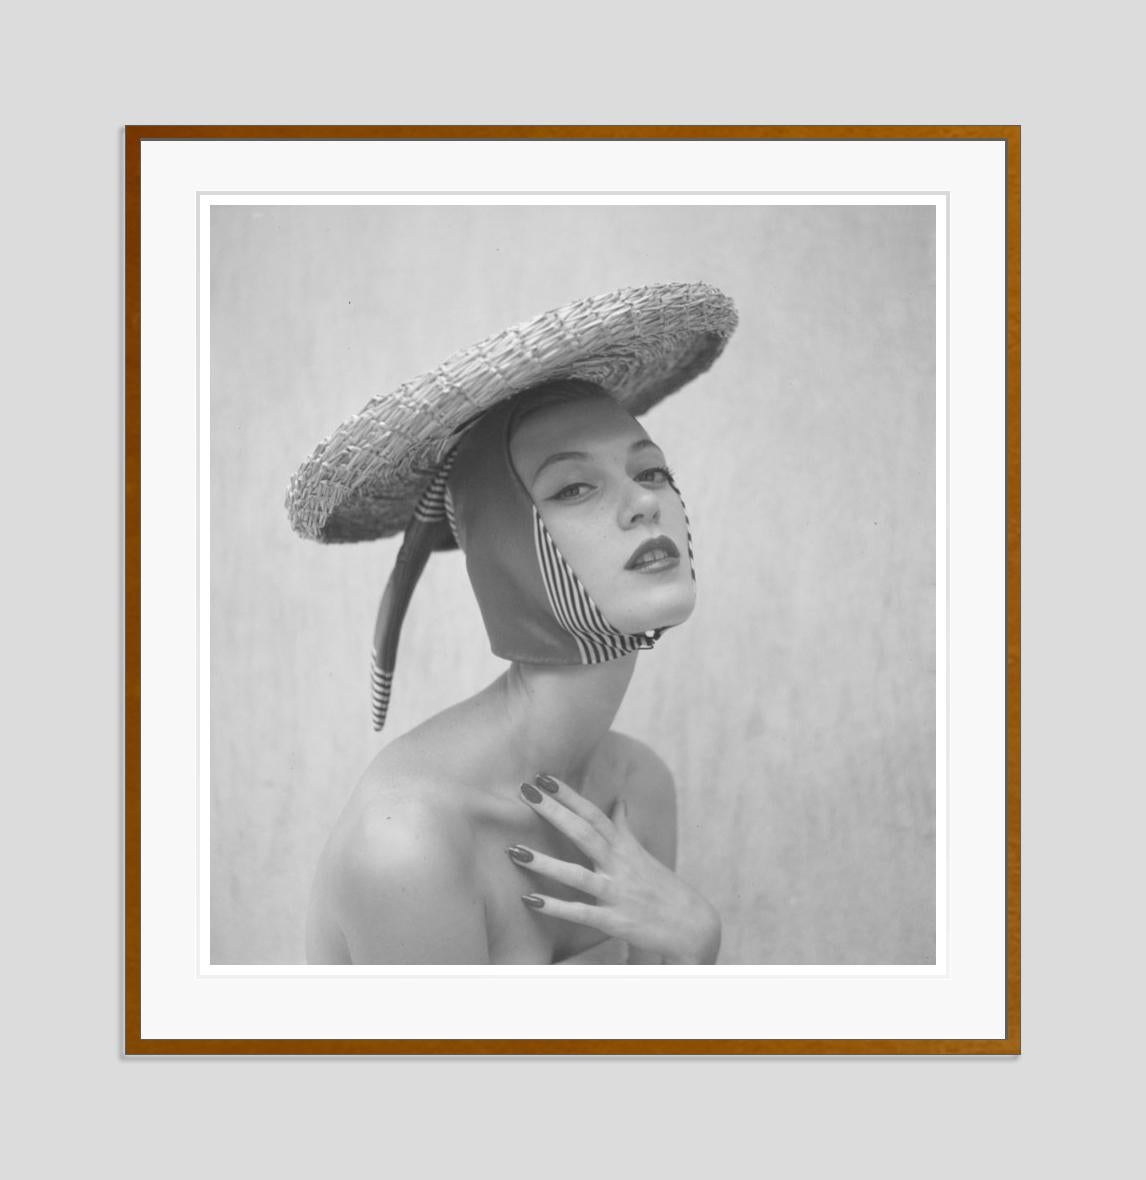  Girl In A Hat 1951 Limited Signature Stamped Edition  - Modern Photograph by Toni Frissell